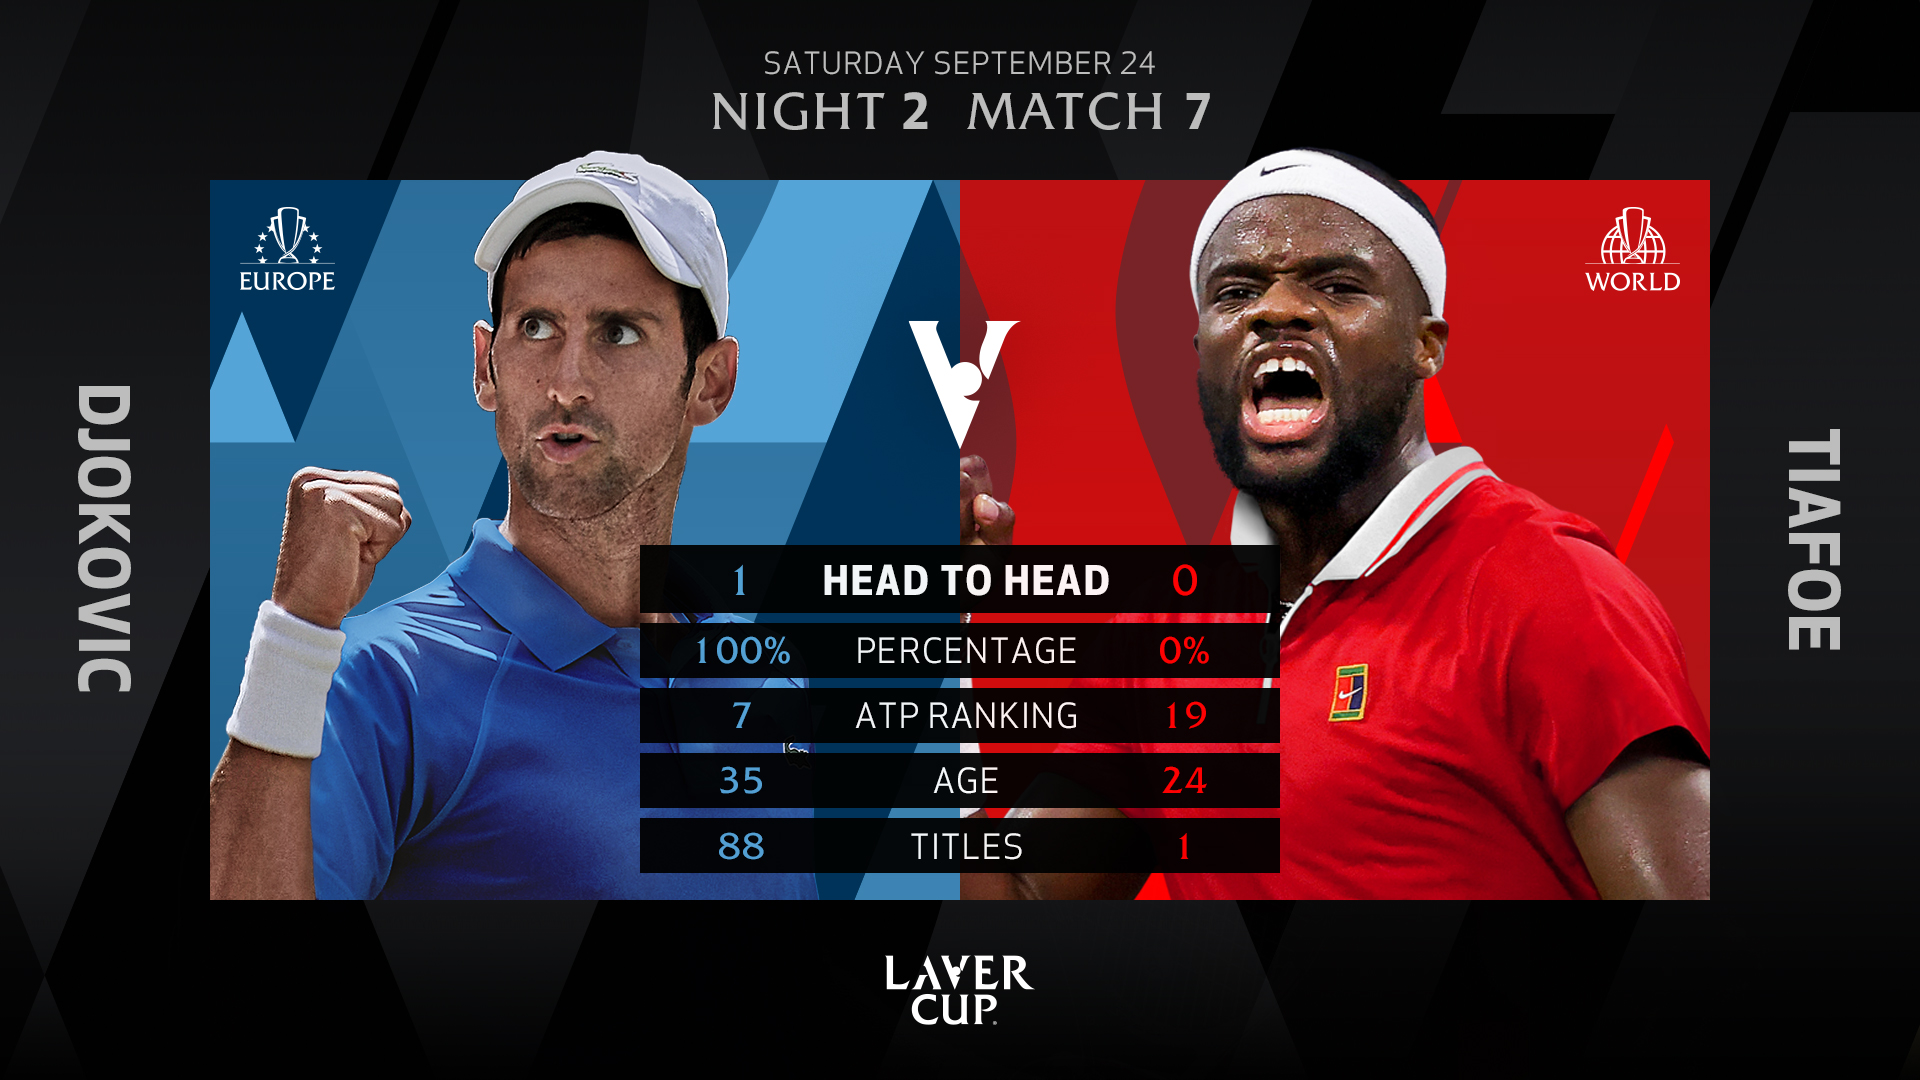 Double duty as Djokovic returns to action Laver Cup